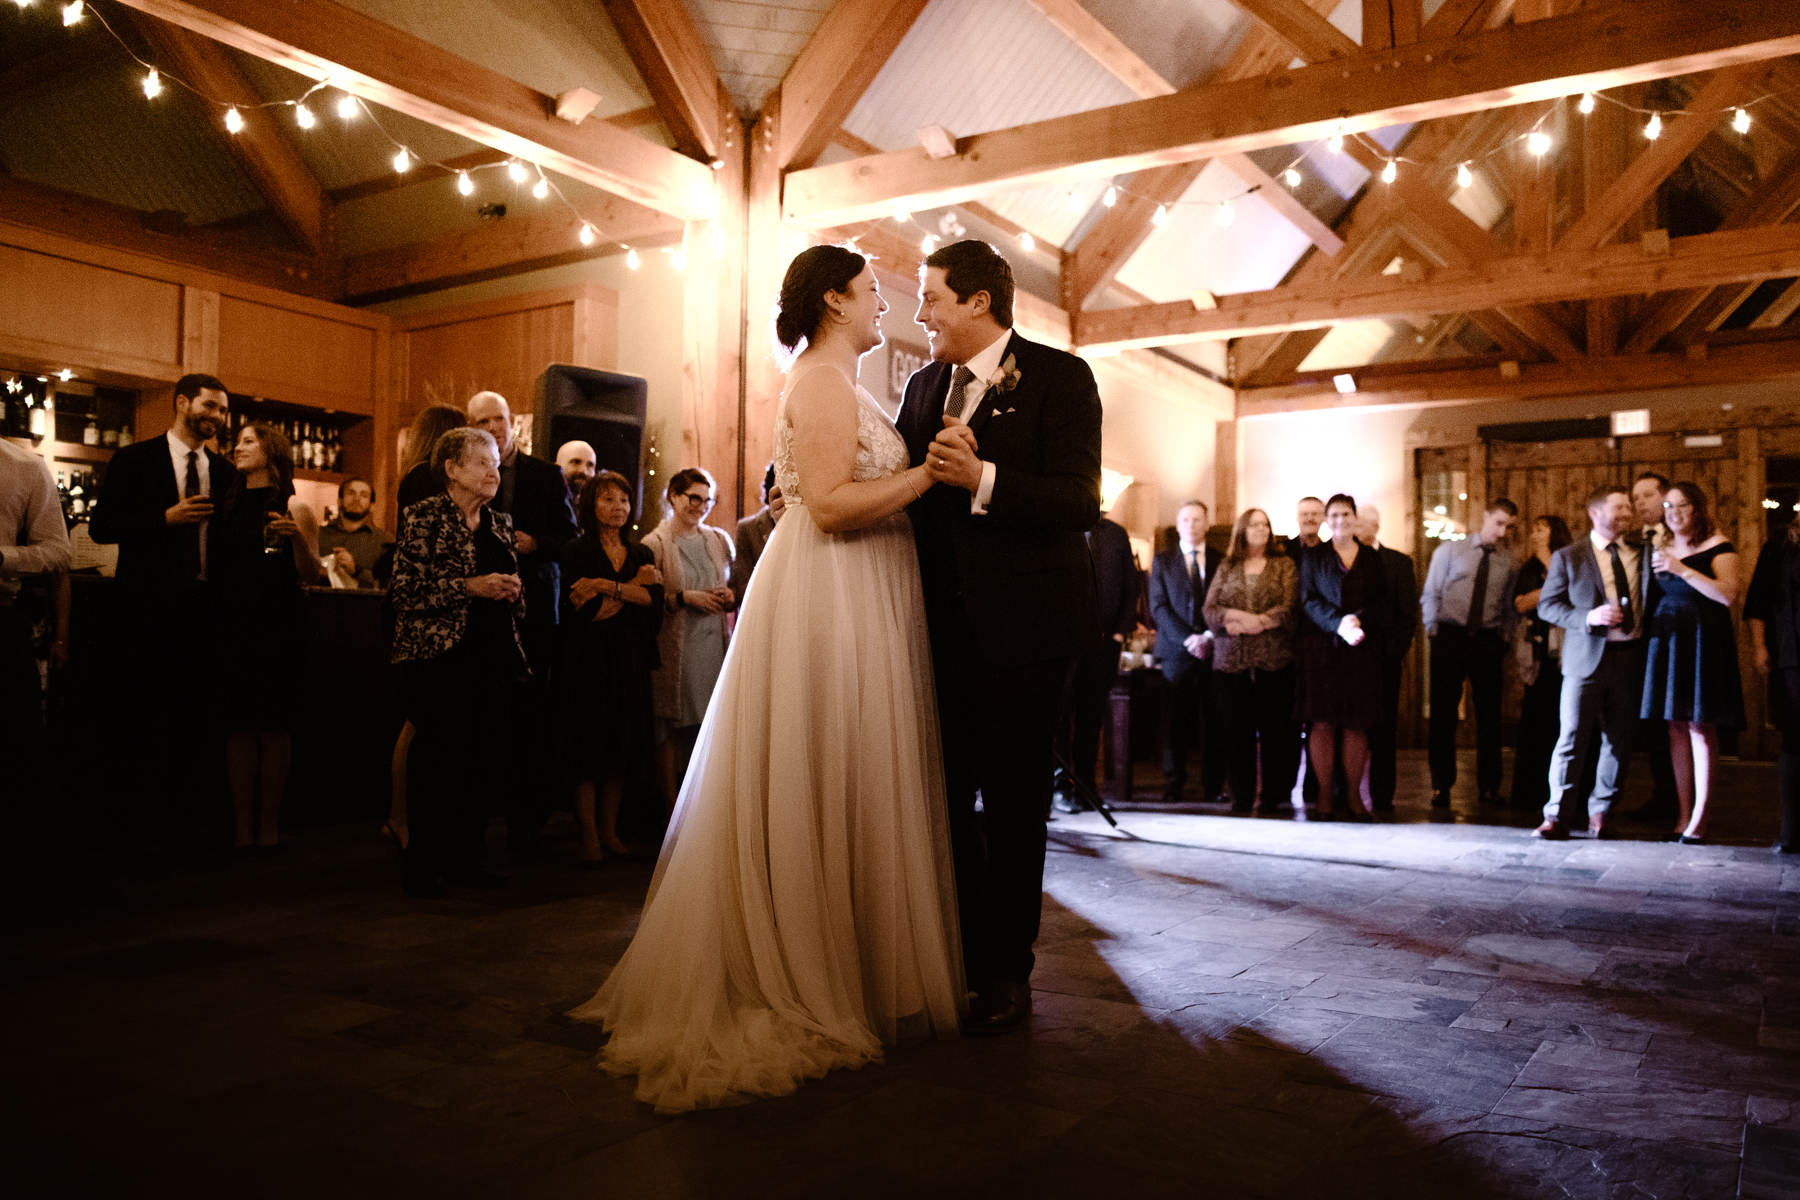 Invermere Wedding Photographers at Eagle Ranch and Panorama Ski Resort - Image 57